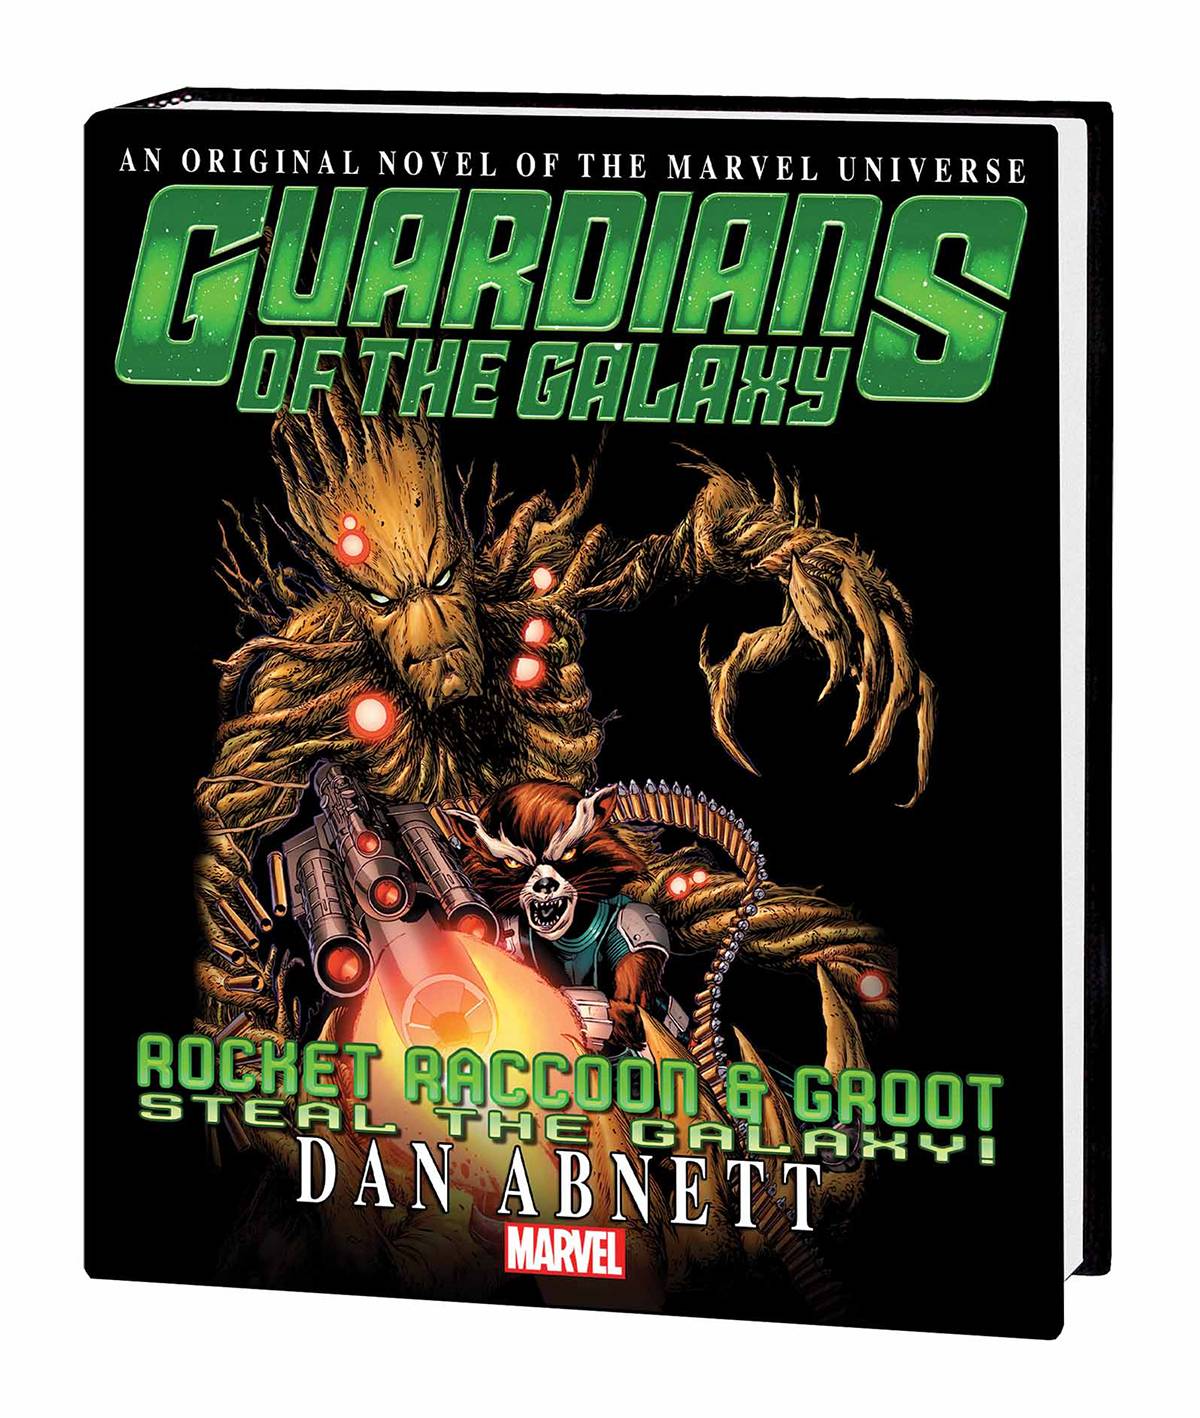 GOTG RR AND GROOT STEAL GALAXY PROSE NOVEL MARKET TP (RES)